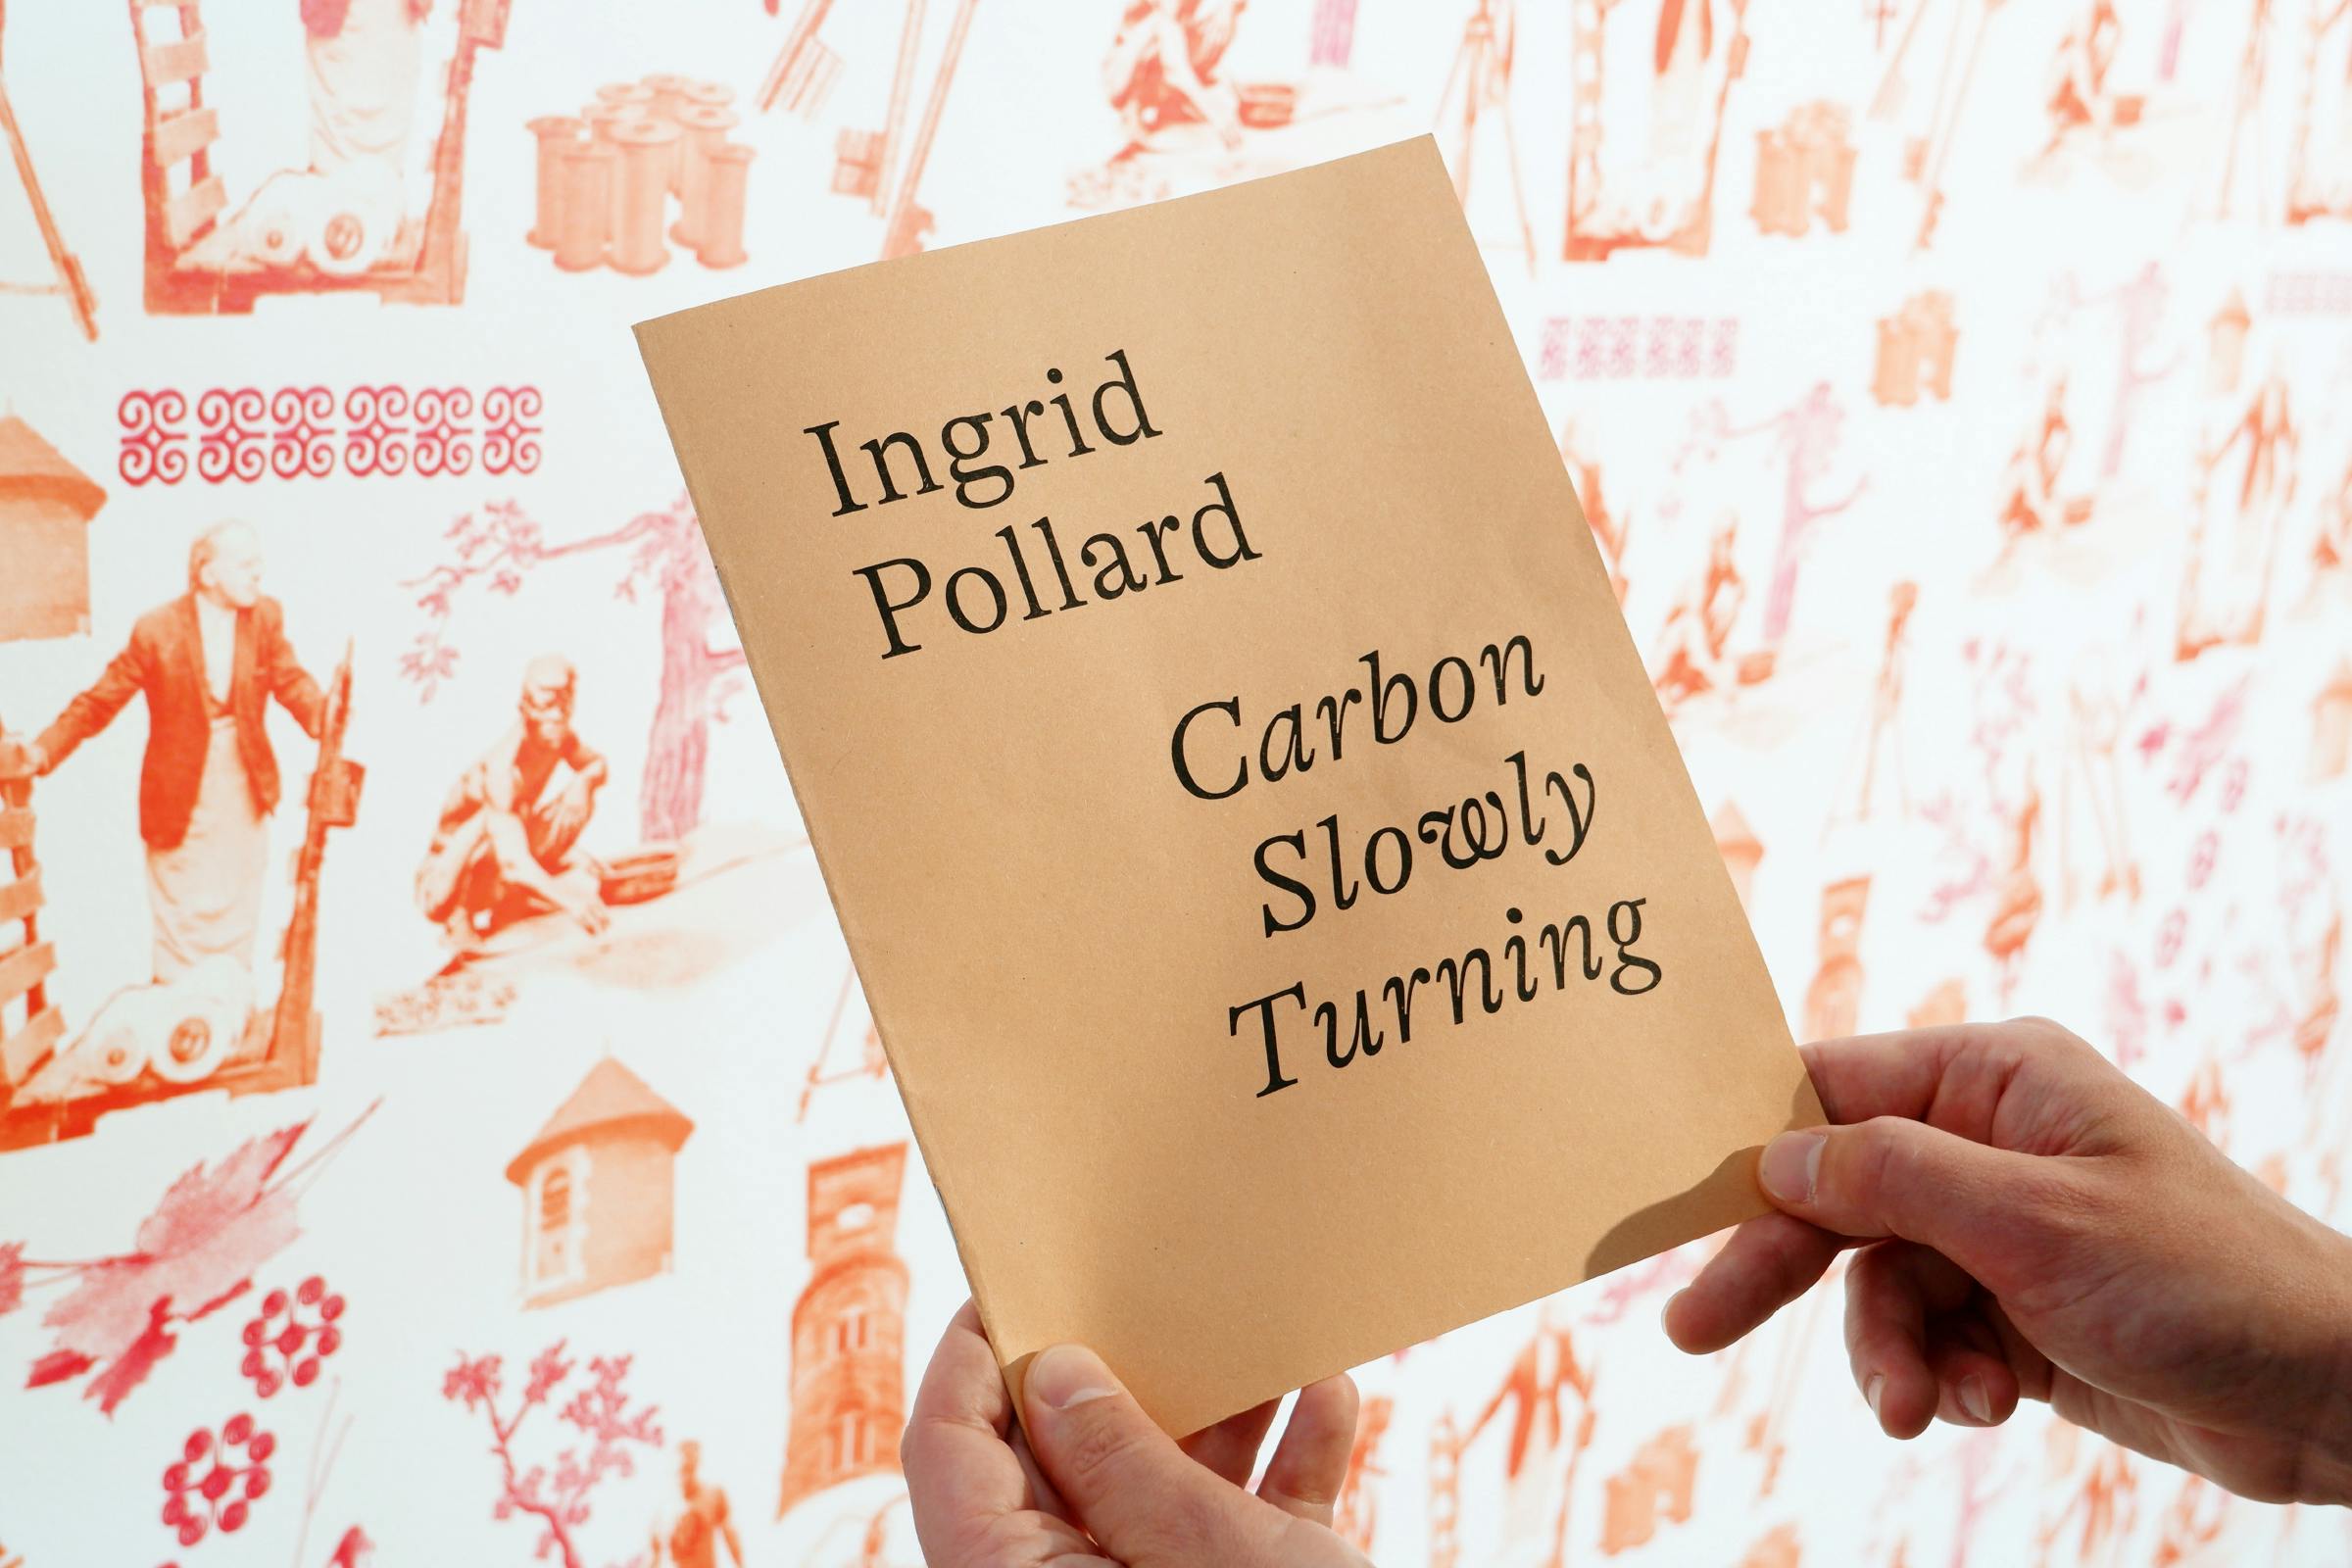 Turner Contemporary, Ingrid Pollard: Carbon Slowly Turning, Exhibition, Campaign, Print, Graphic Design by Wolfe Hall